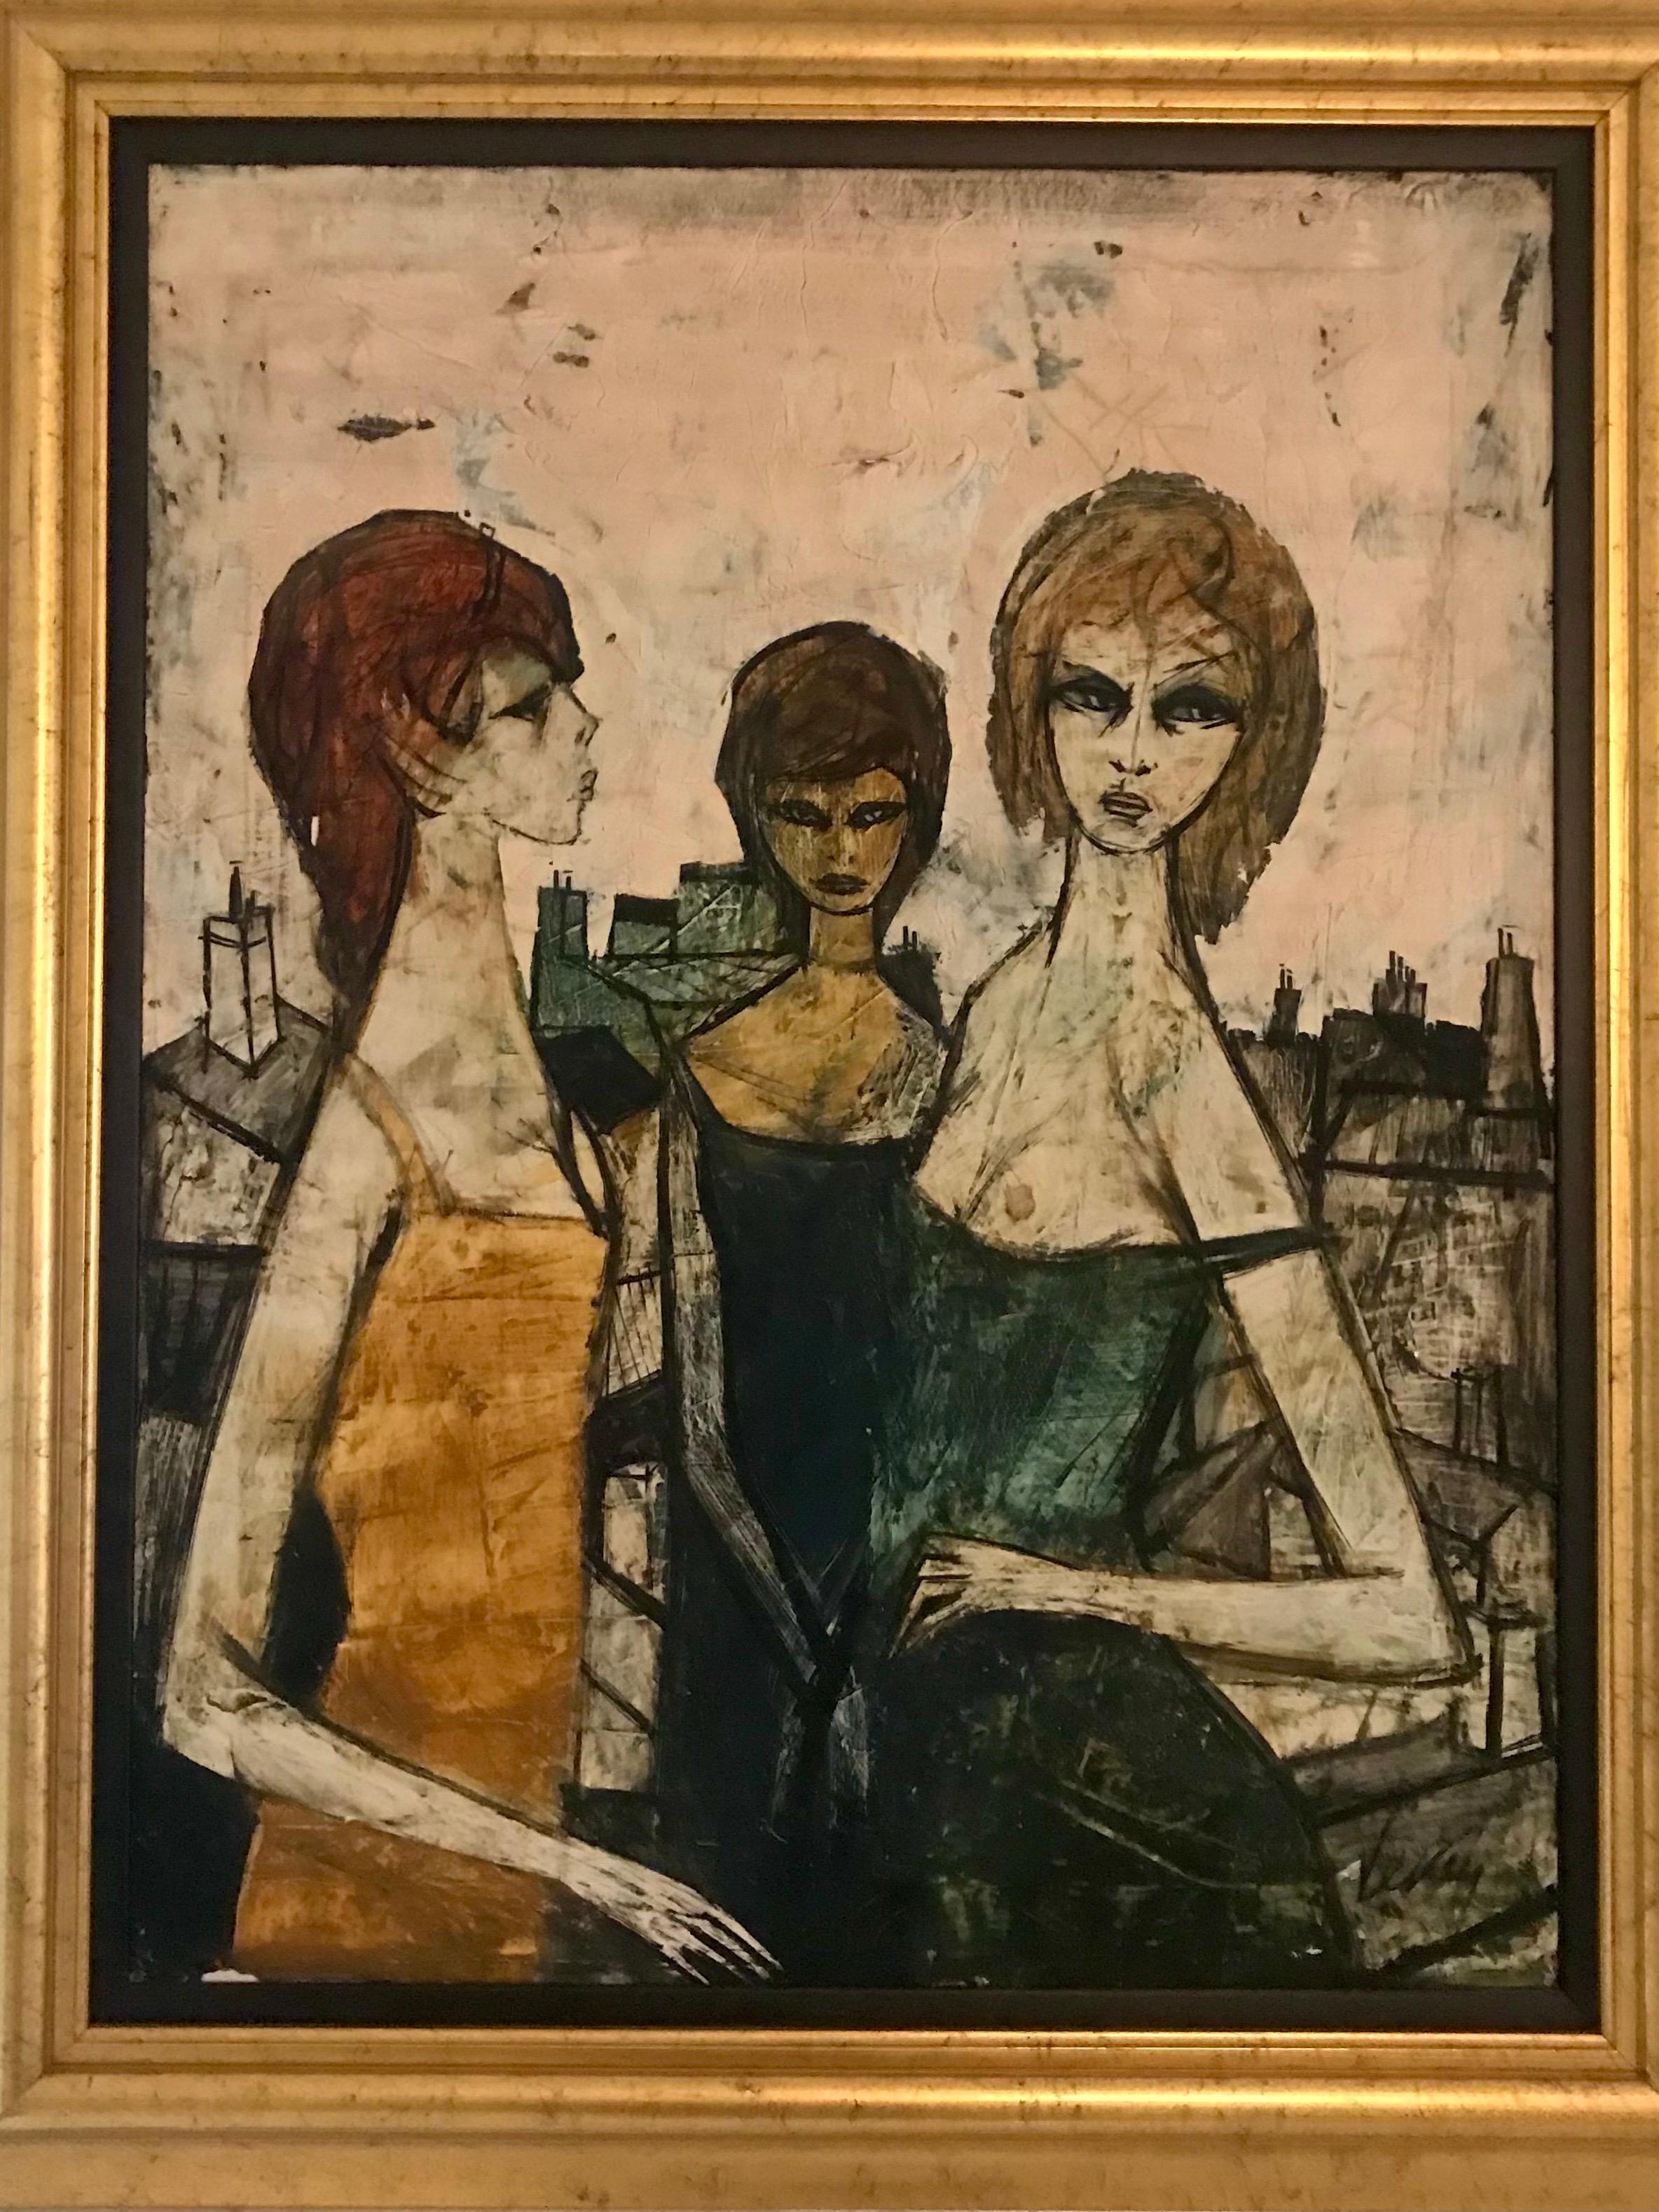 Mid-Century Modern Original Oil on Canvas Painting by Charles Levier of Les Filles, circa 1950s